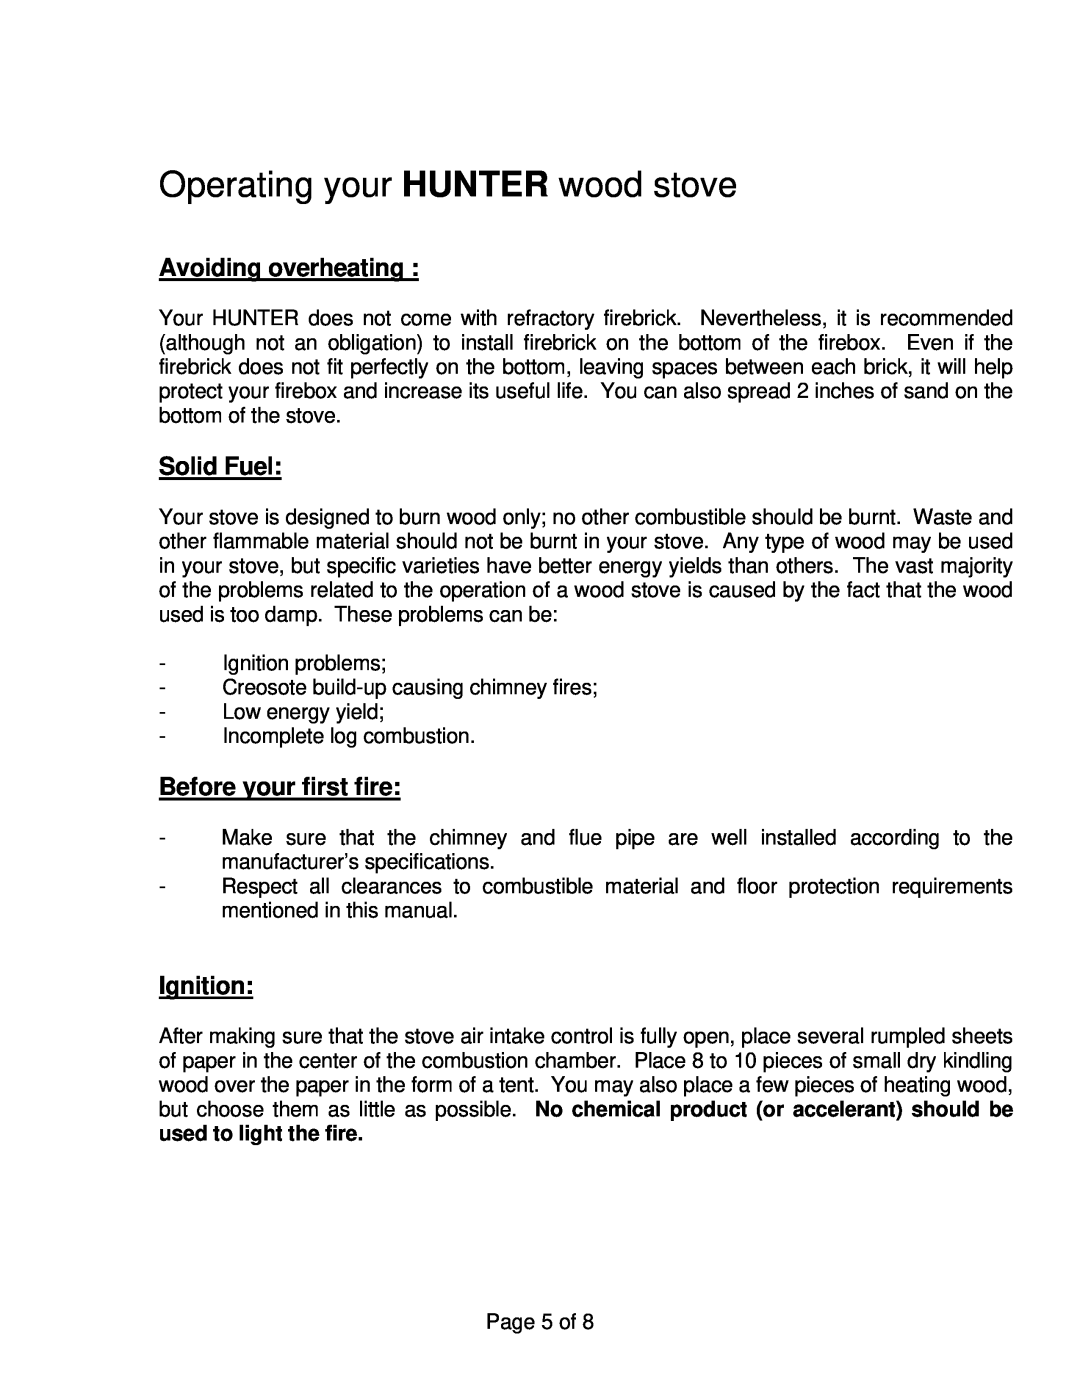 Drolet Hunter Wood Stove Operating your HUNTER wood stove, Avoiding overheating, Solid Fuel, Before your first fire 